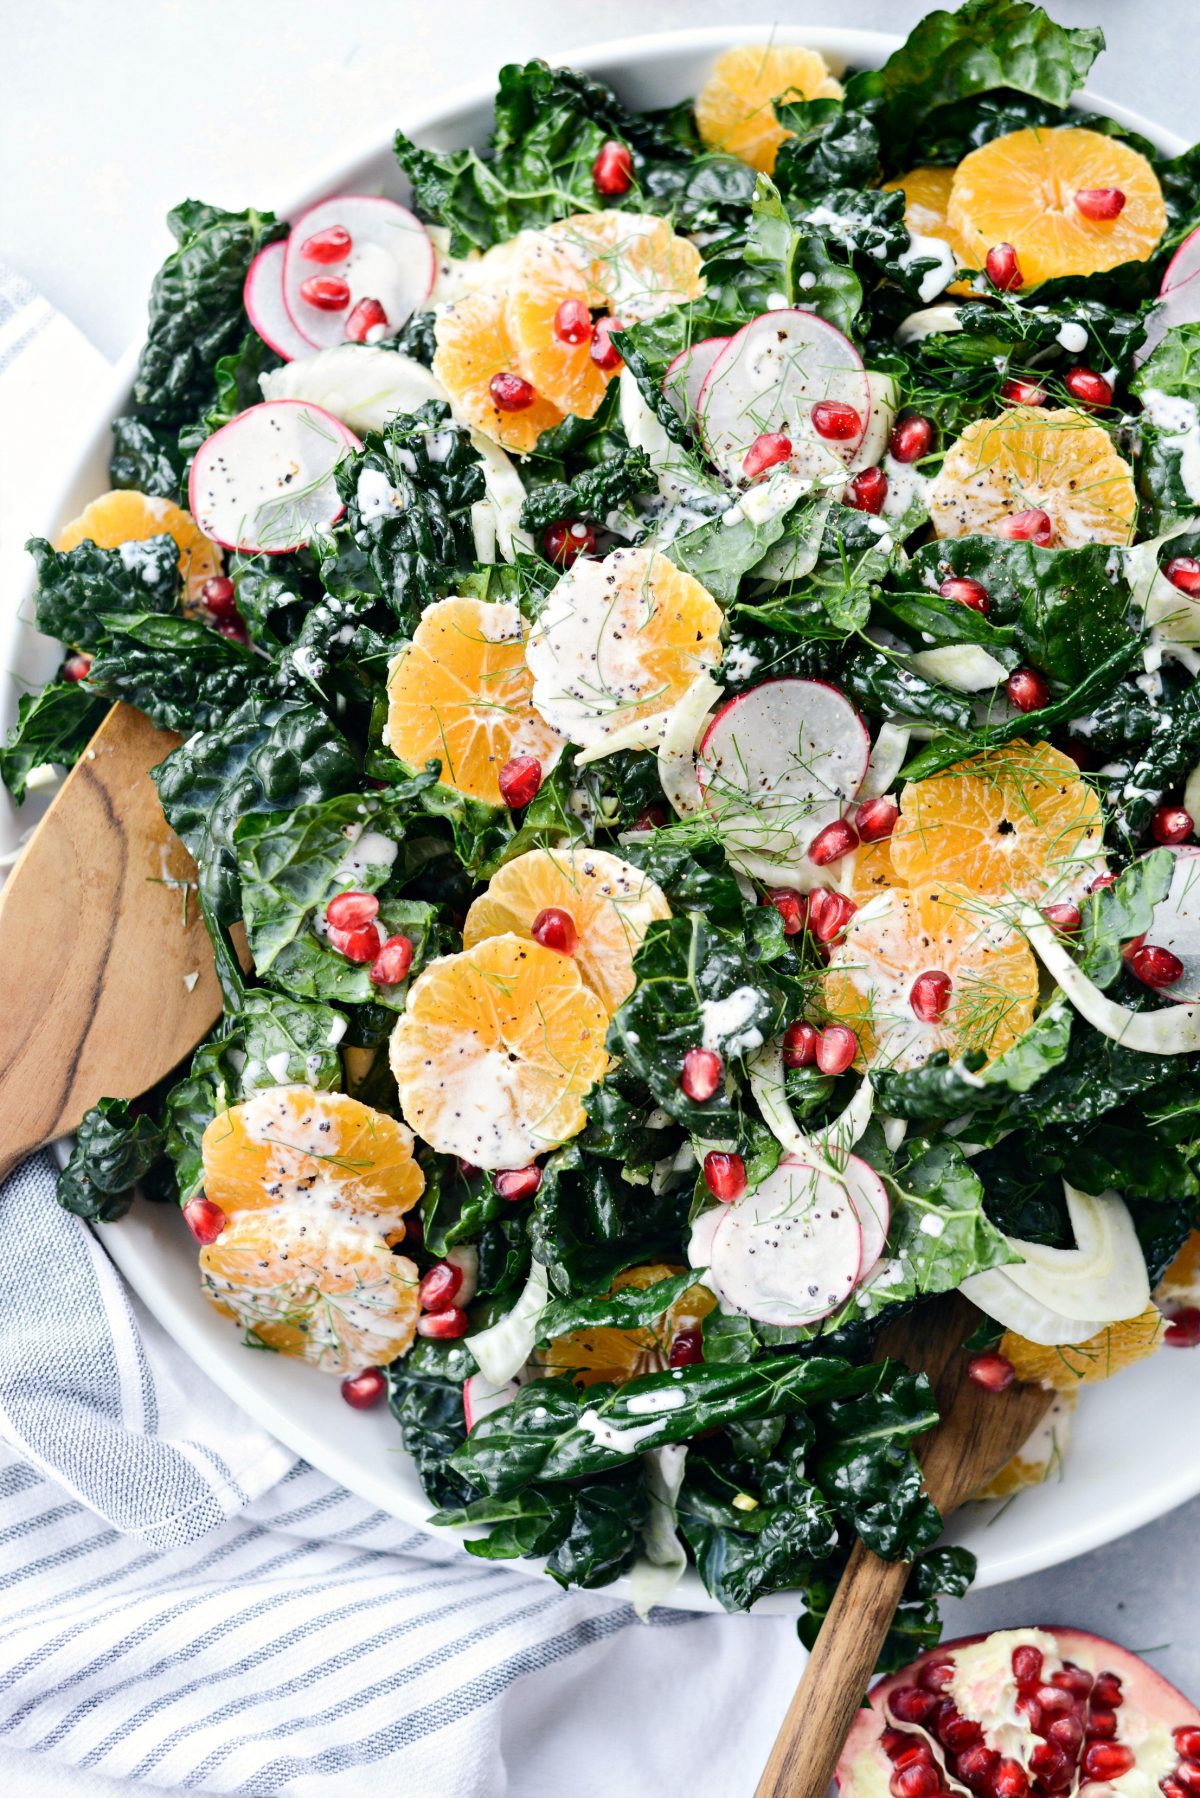 Winter Clementine Fennel and Kale Salad